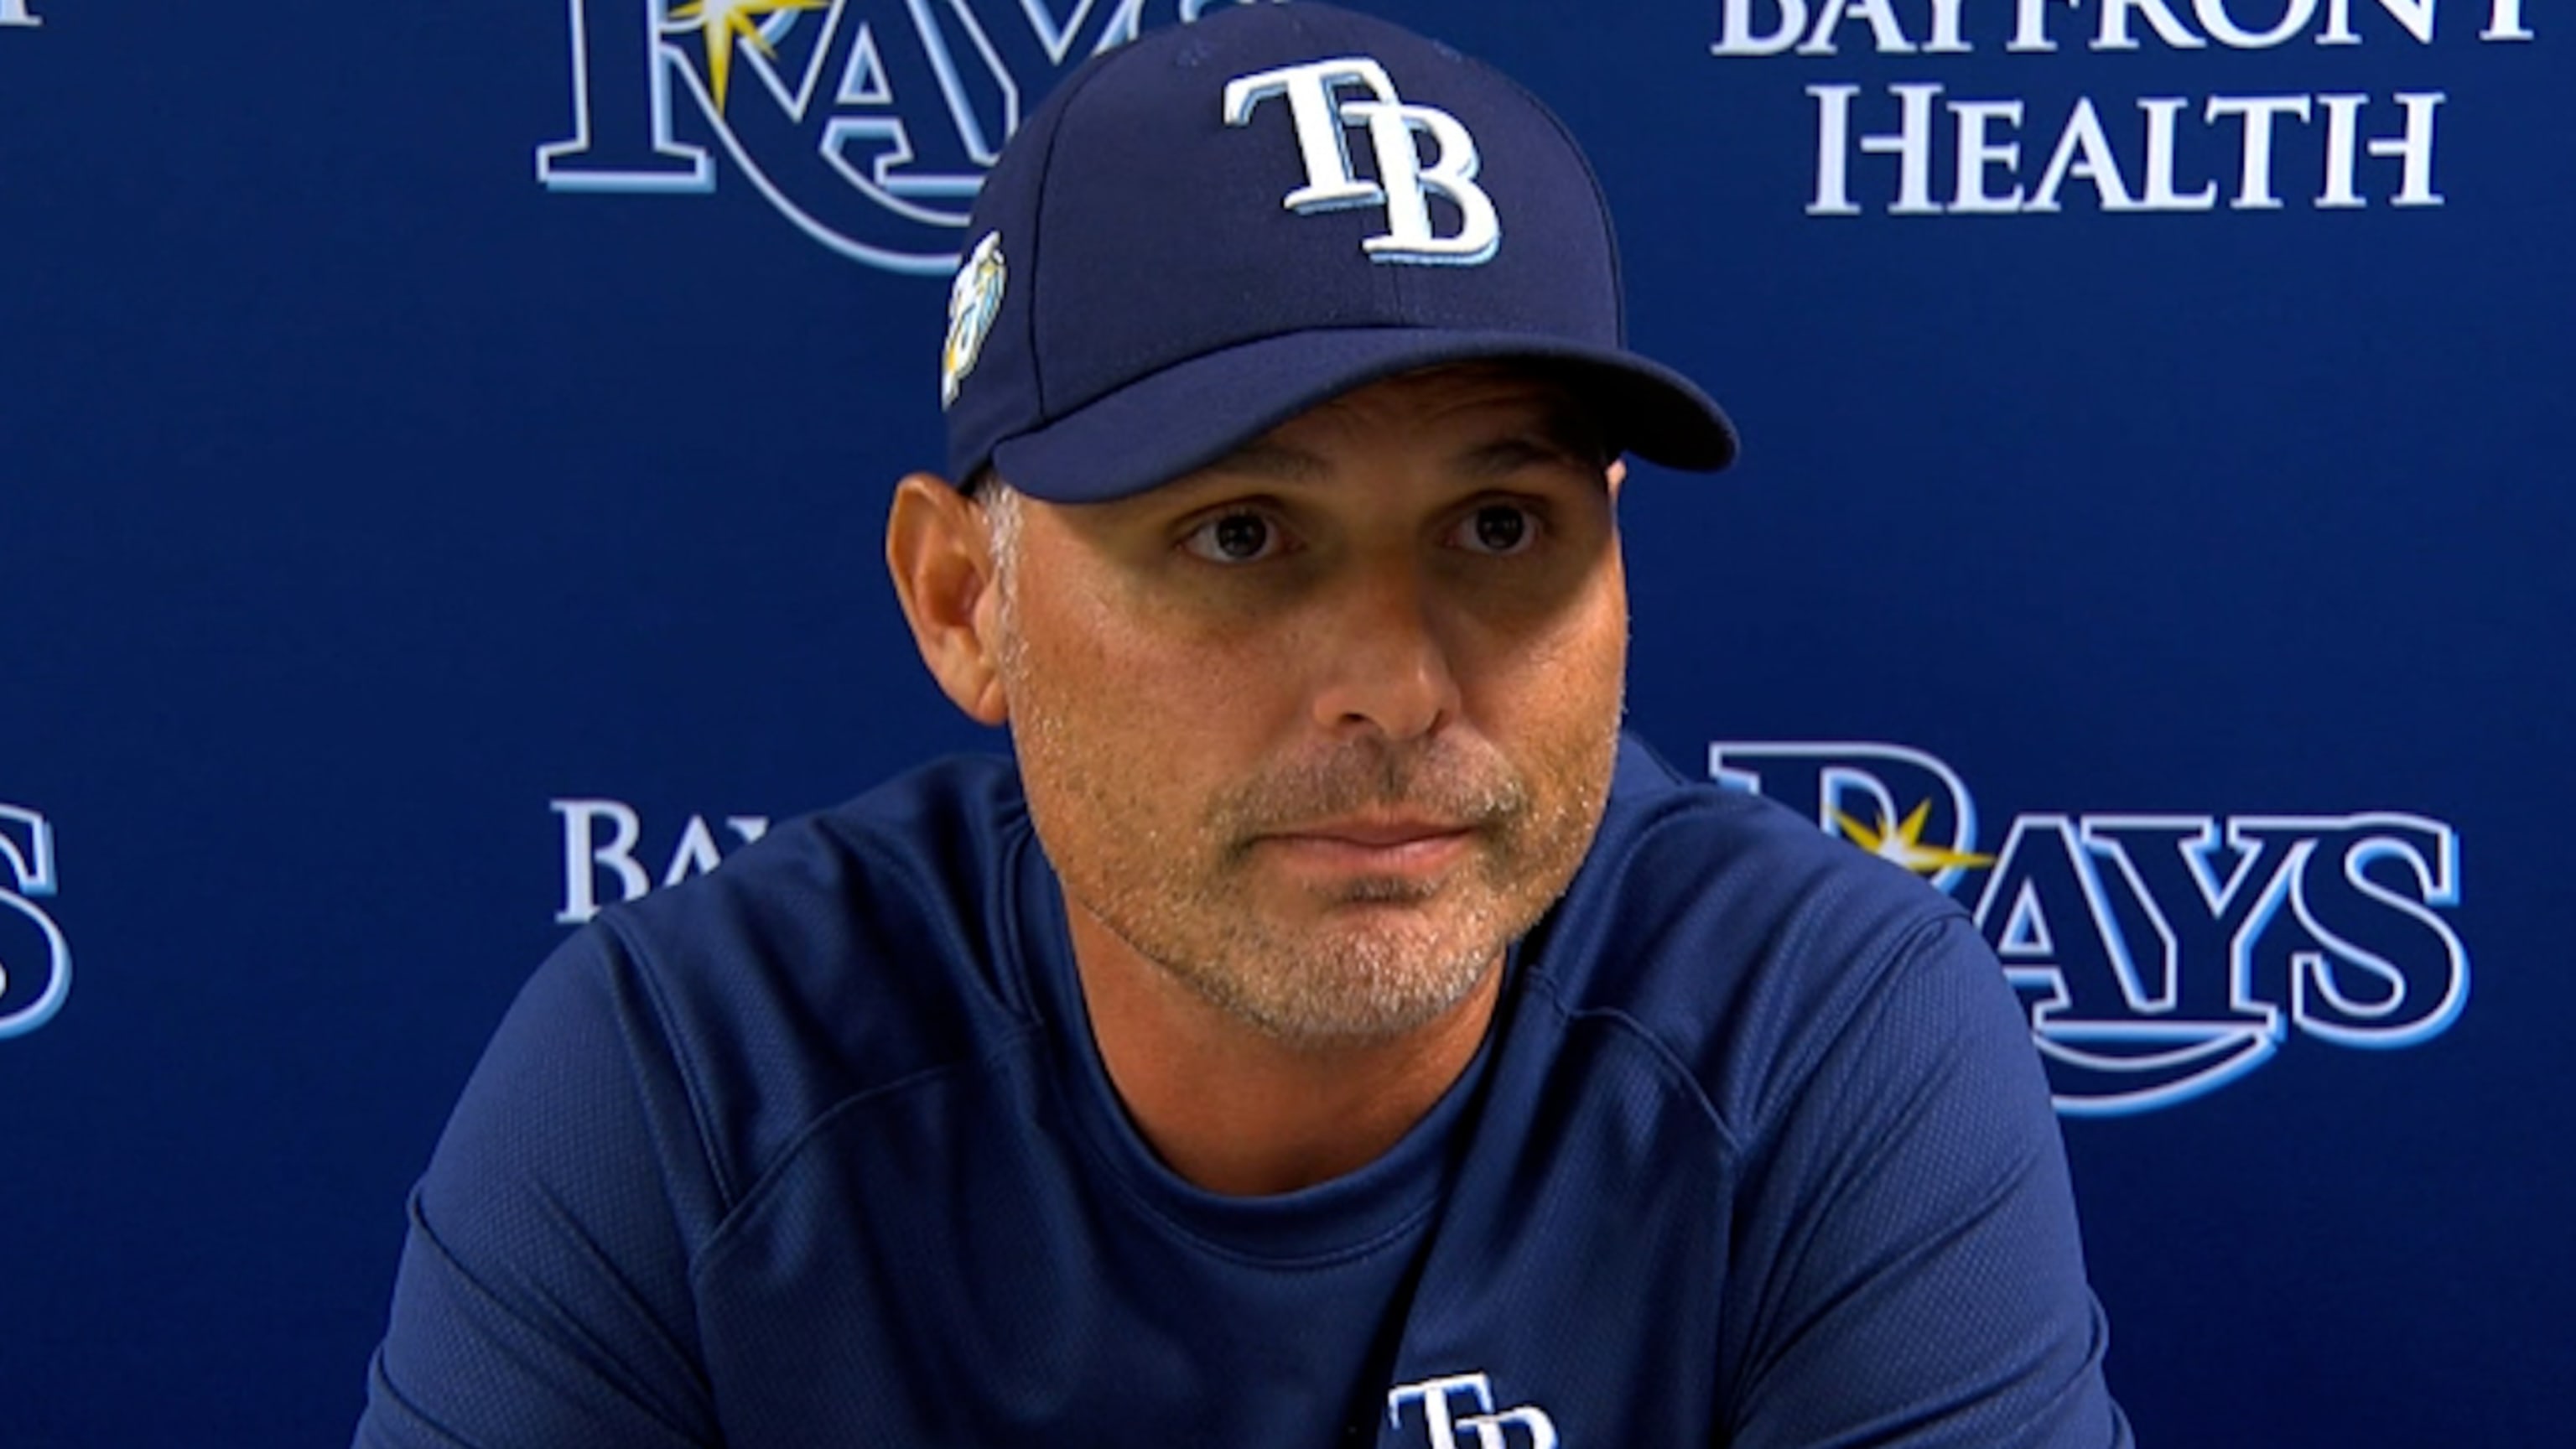 Shane McClanahan leads the way as Rays bounce back to beat Blue Jays